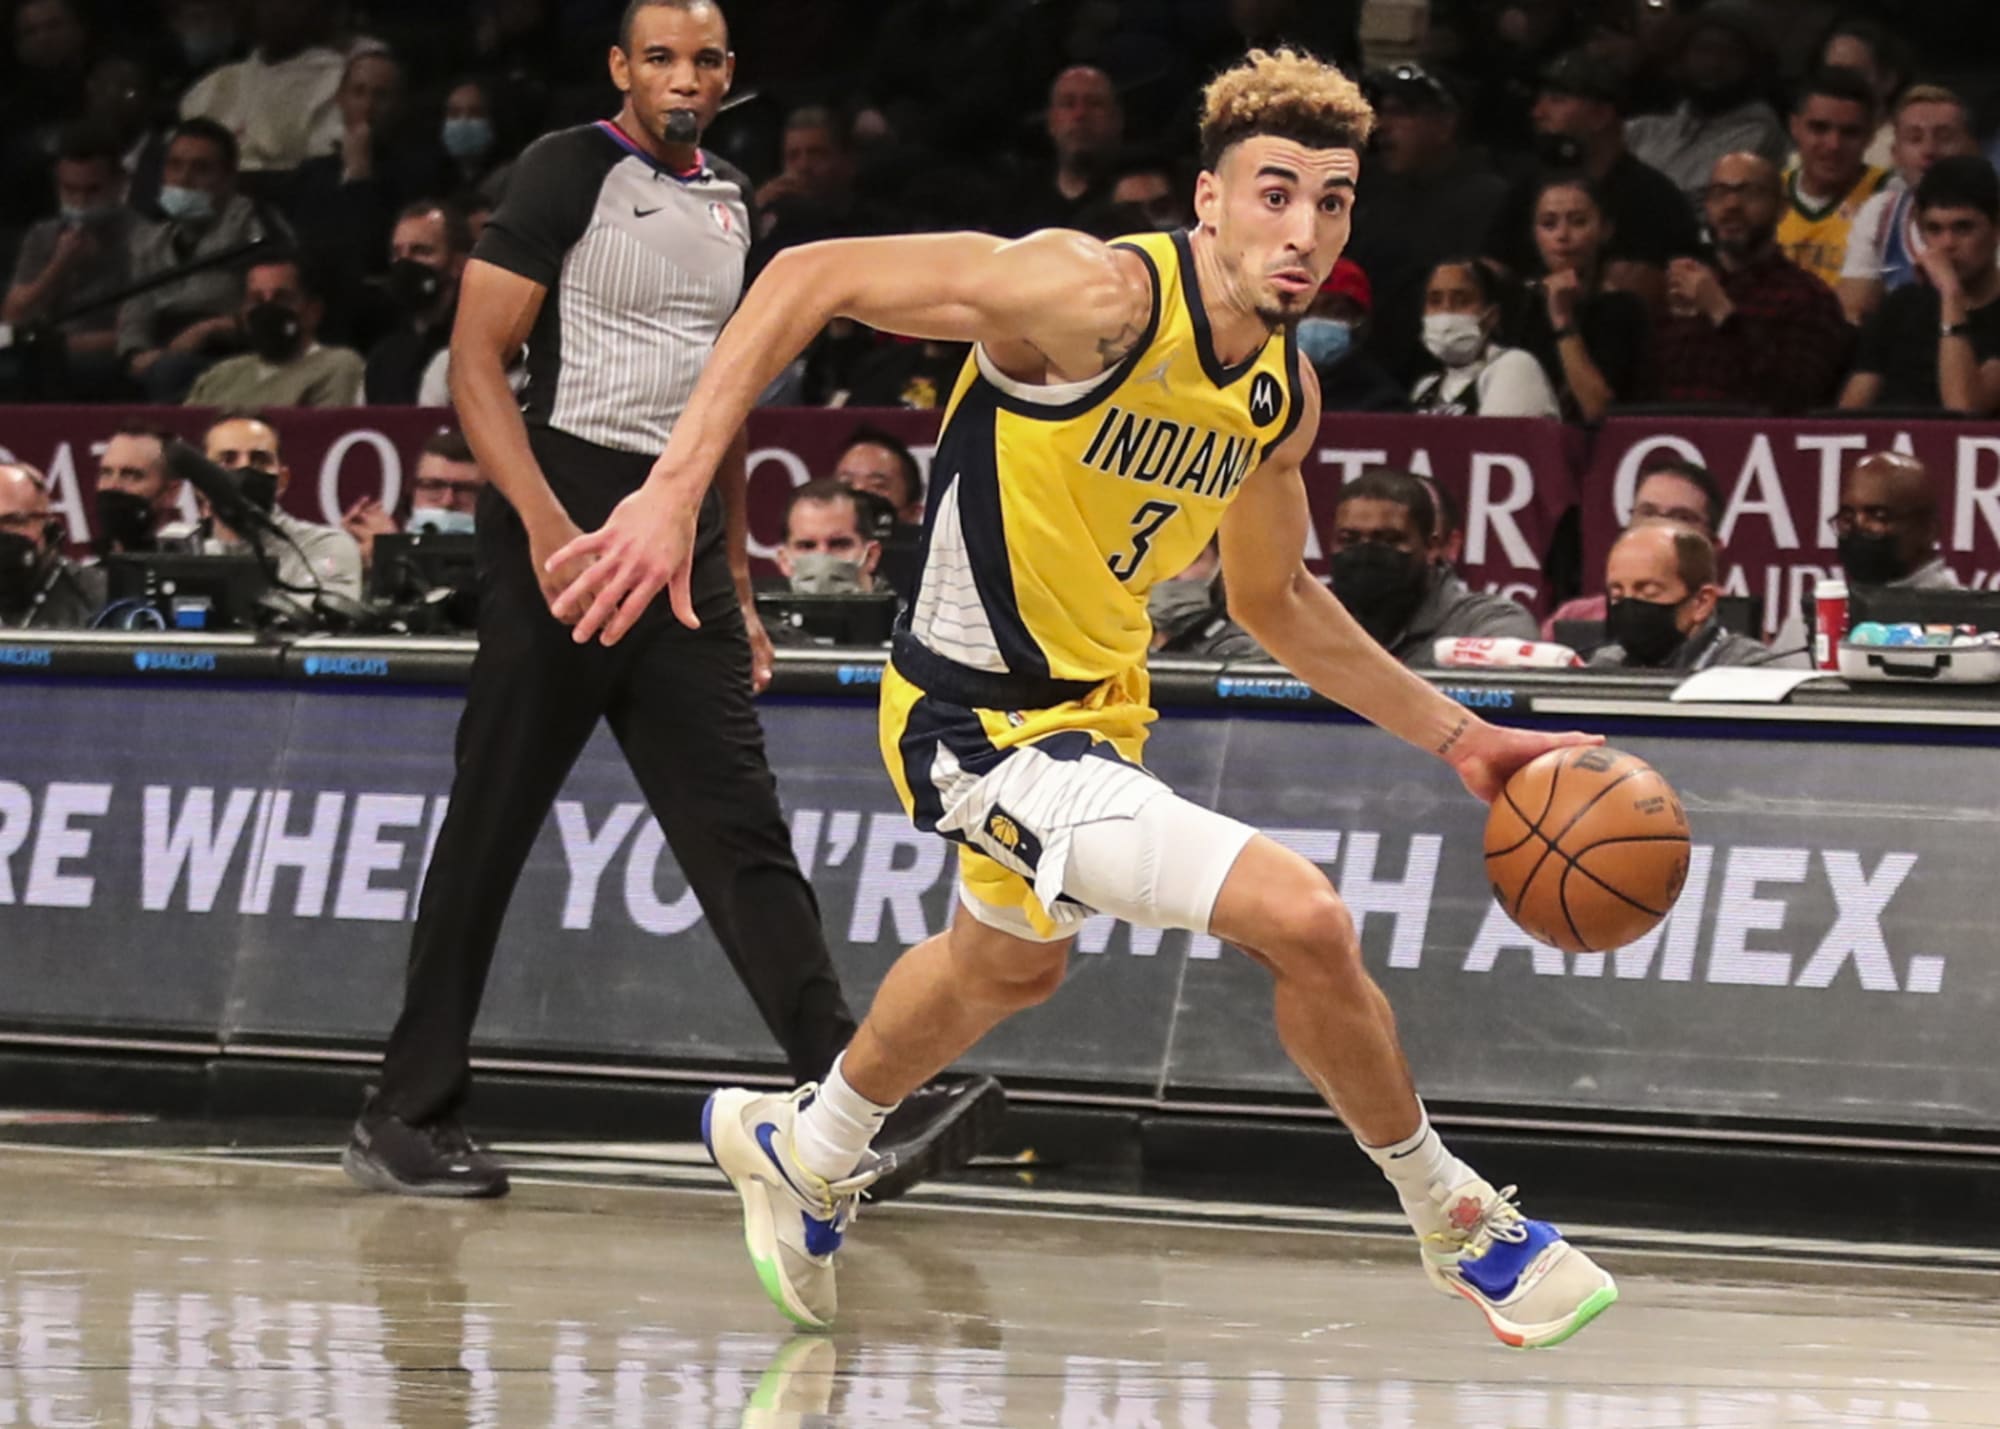 Pacers news: Chris Duarte sets team scoring record in rookie debut